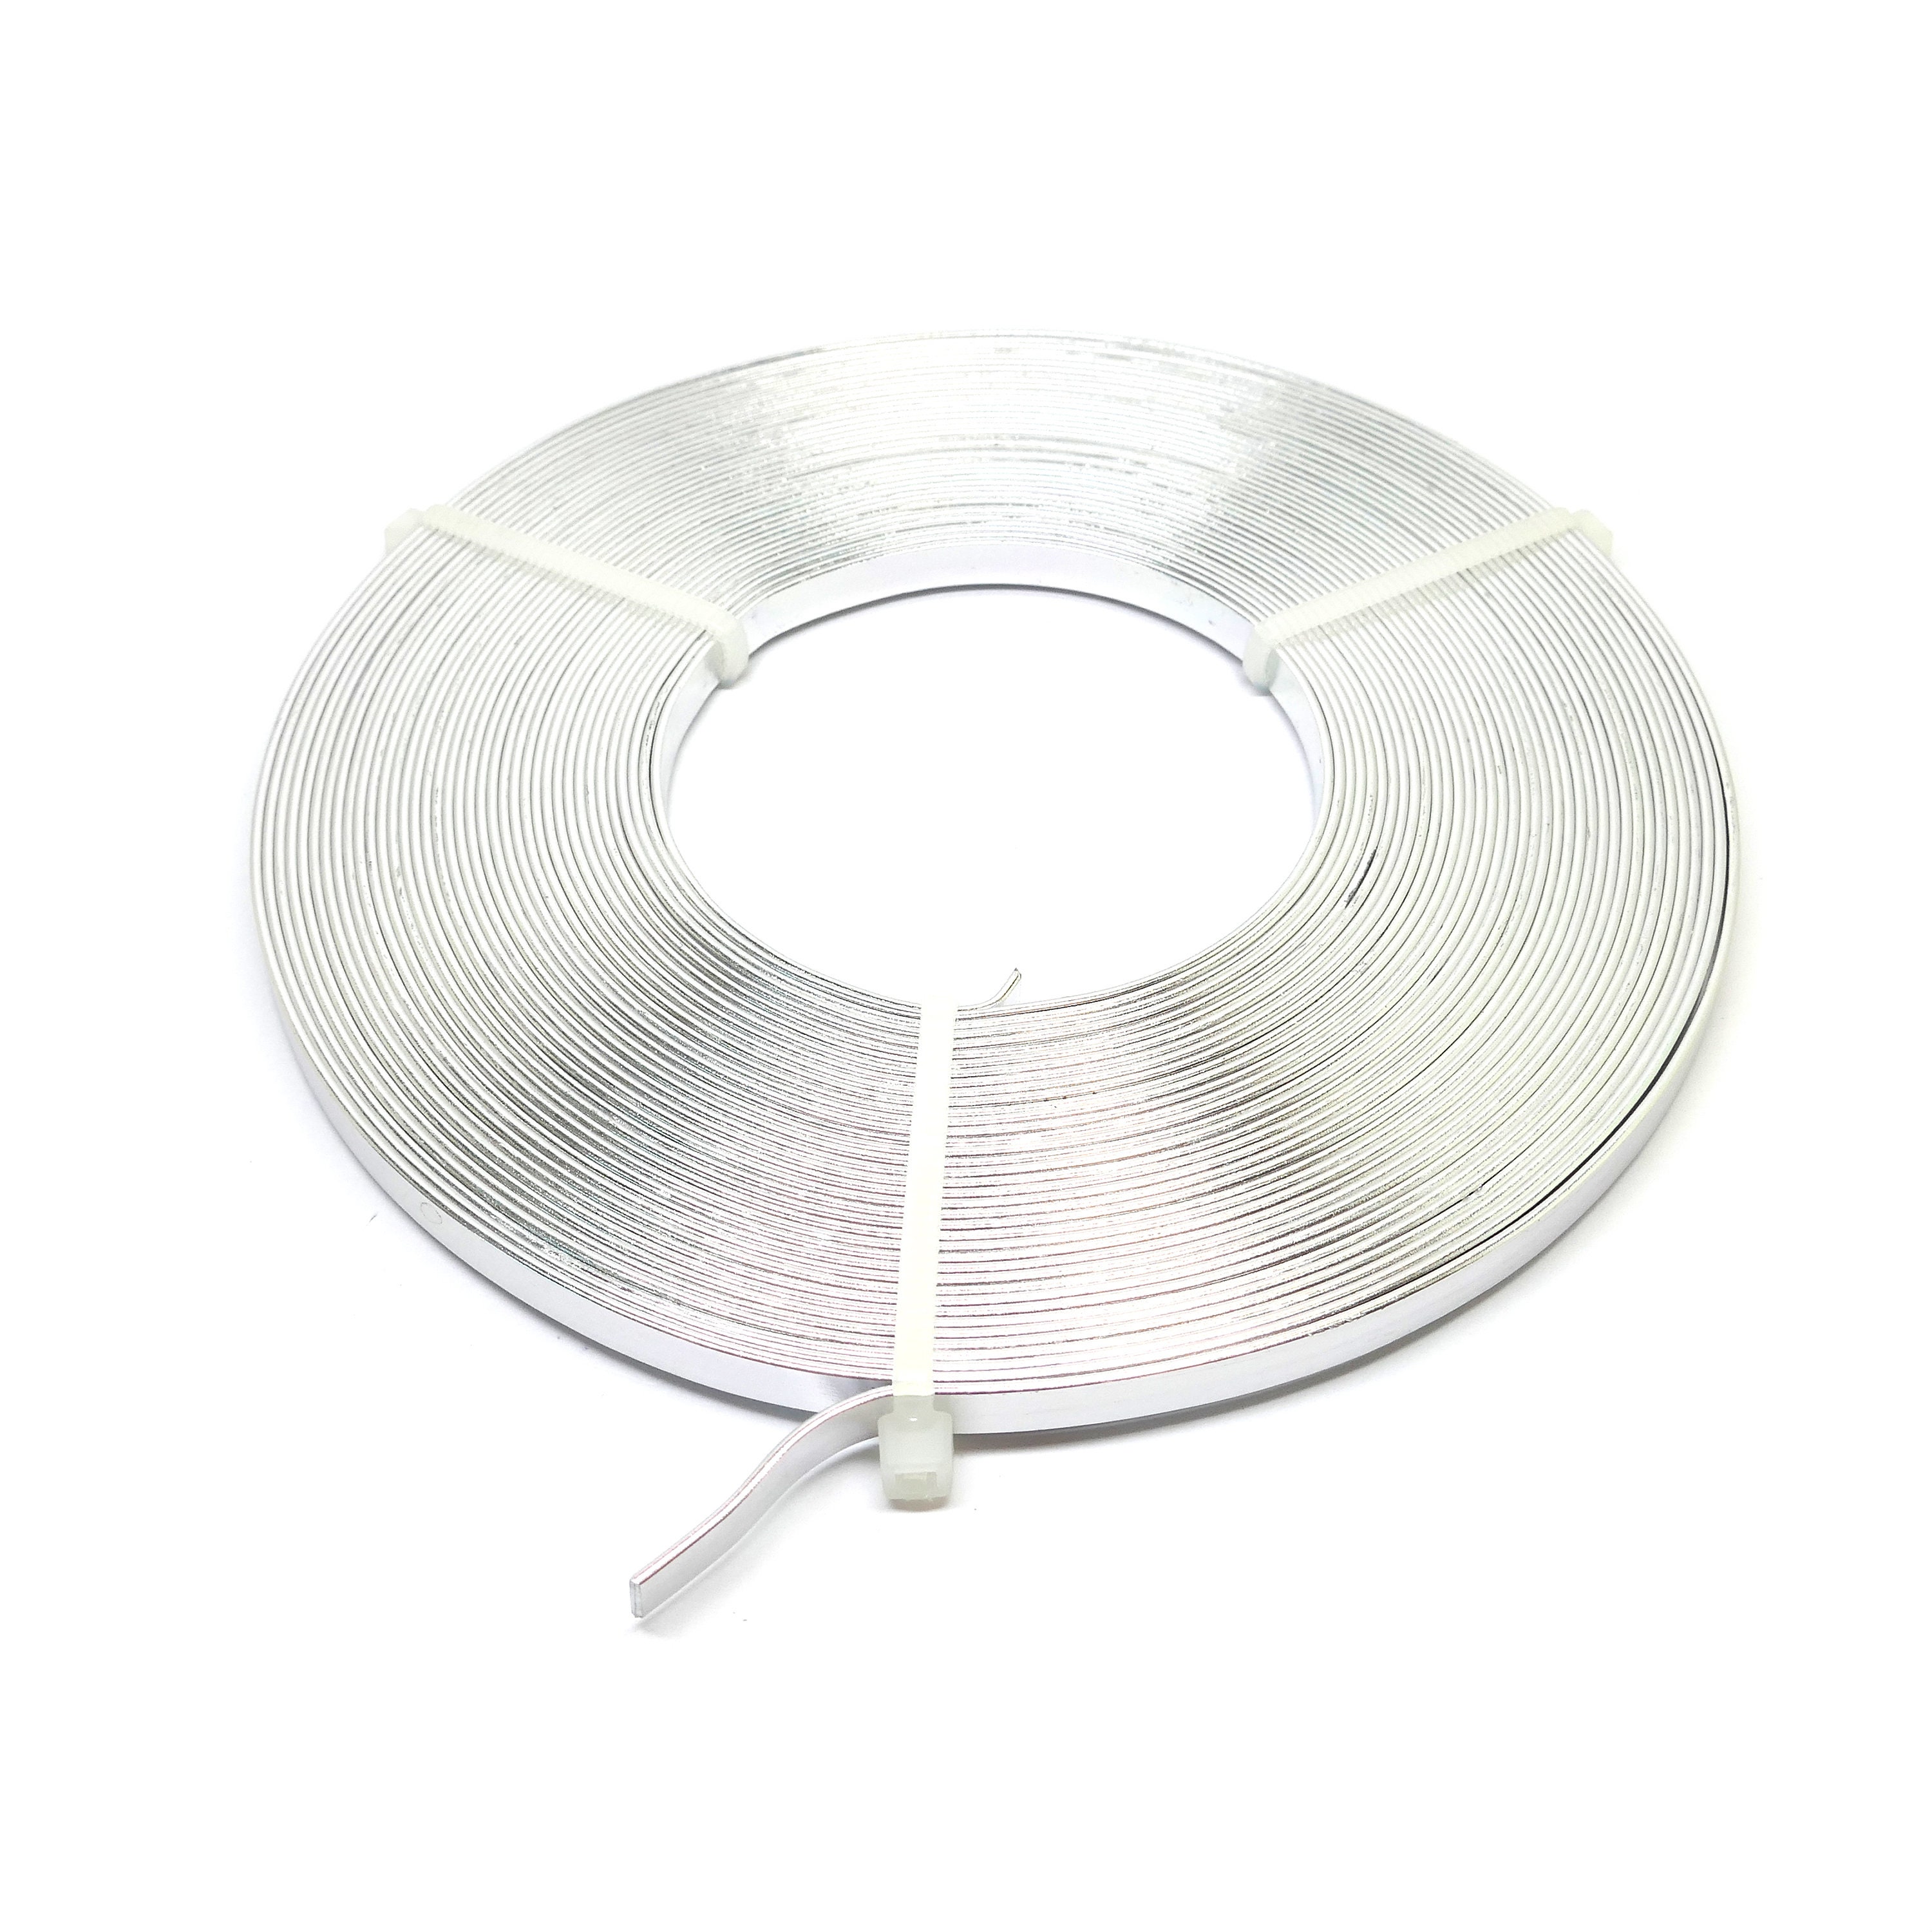 Sterling Silver Wire, S999 Silver Flat Wire for Jewelry Making